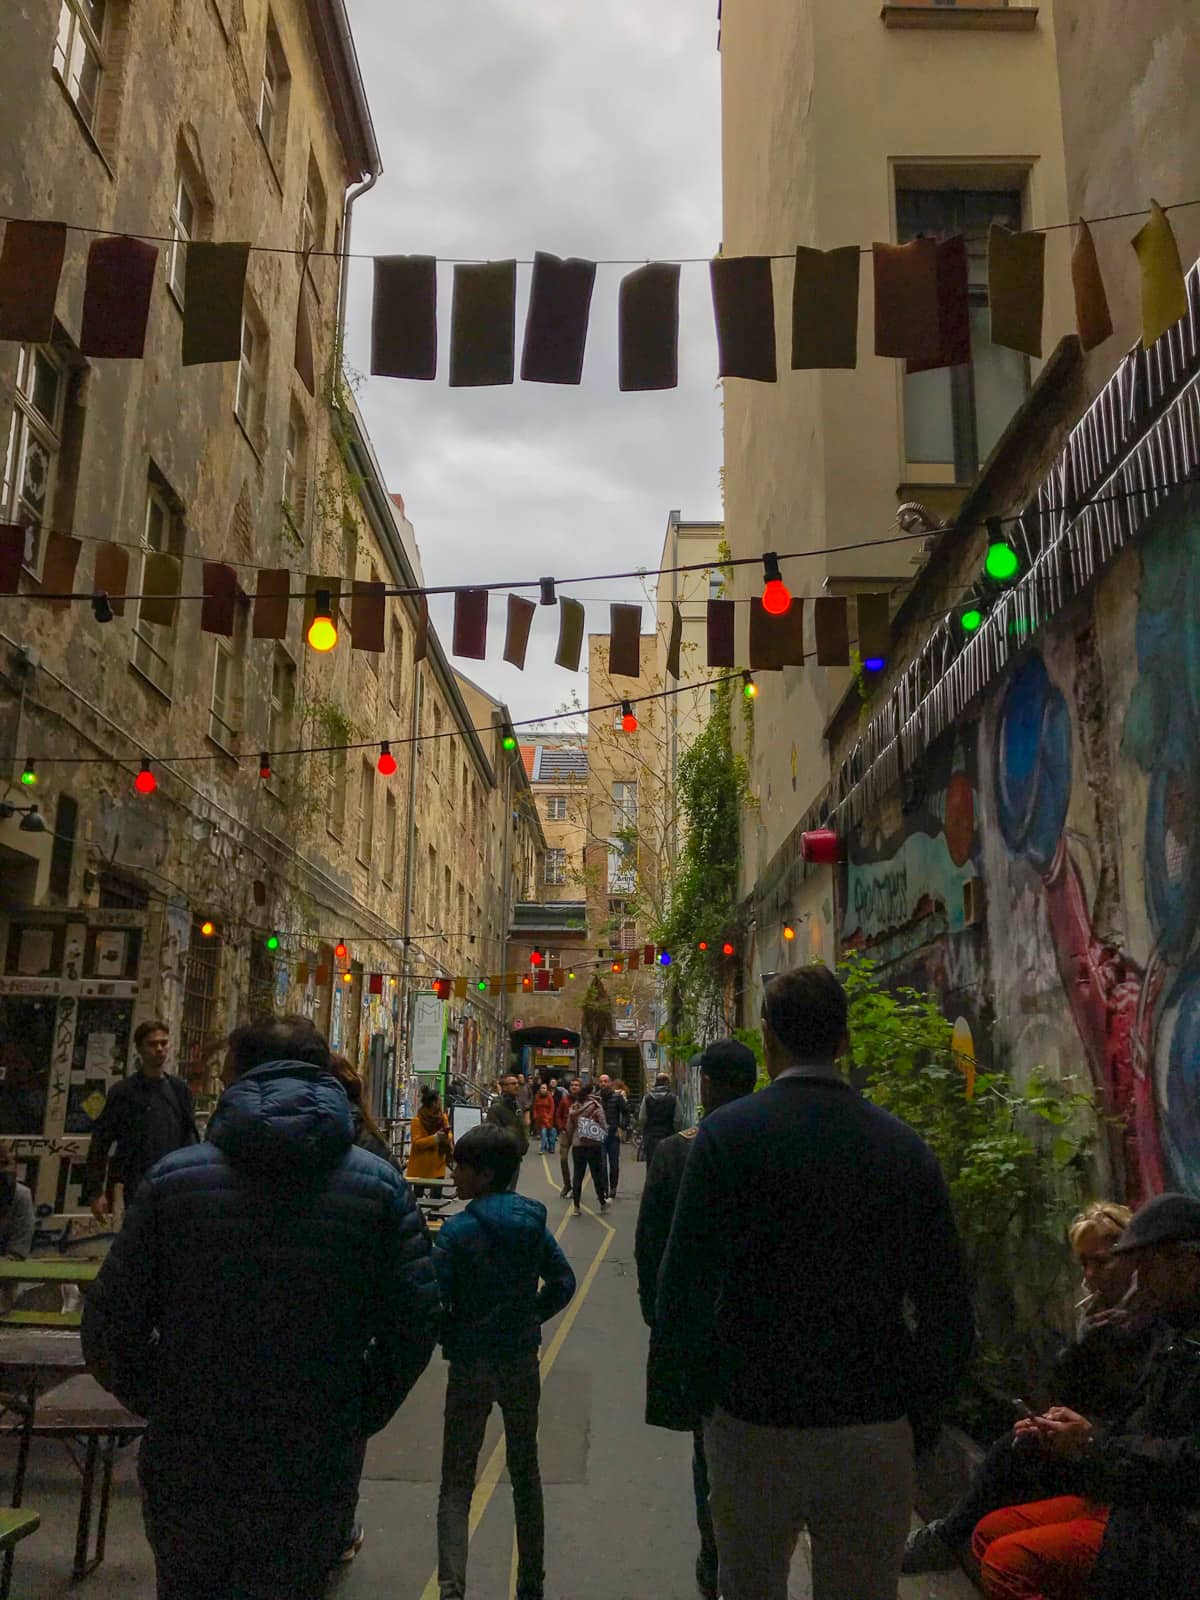 A laneway with coloured lights hanging from wires across the laneway like a canopy, some people walking in the middle of the frame, and street art on the walls of the buildings on either side.